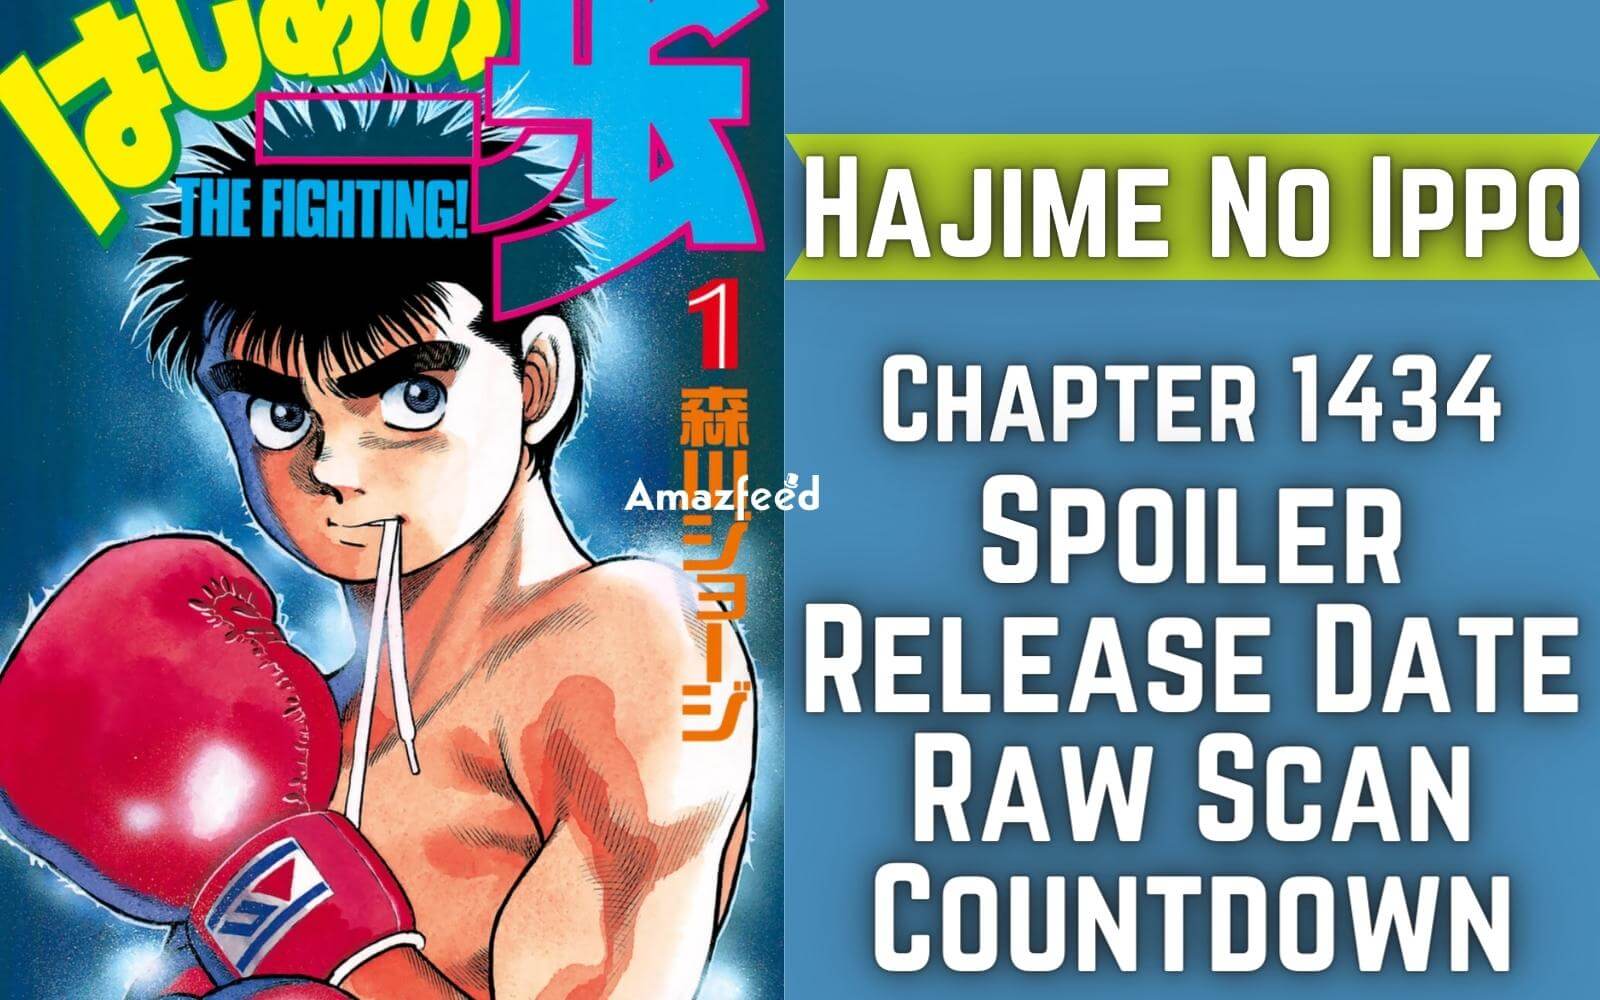 Ippo is left hand dominant, Kamogawa's forcing his own style